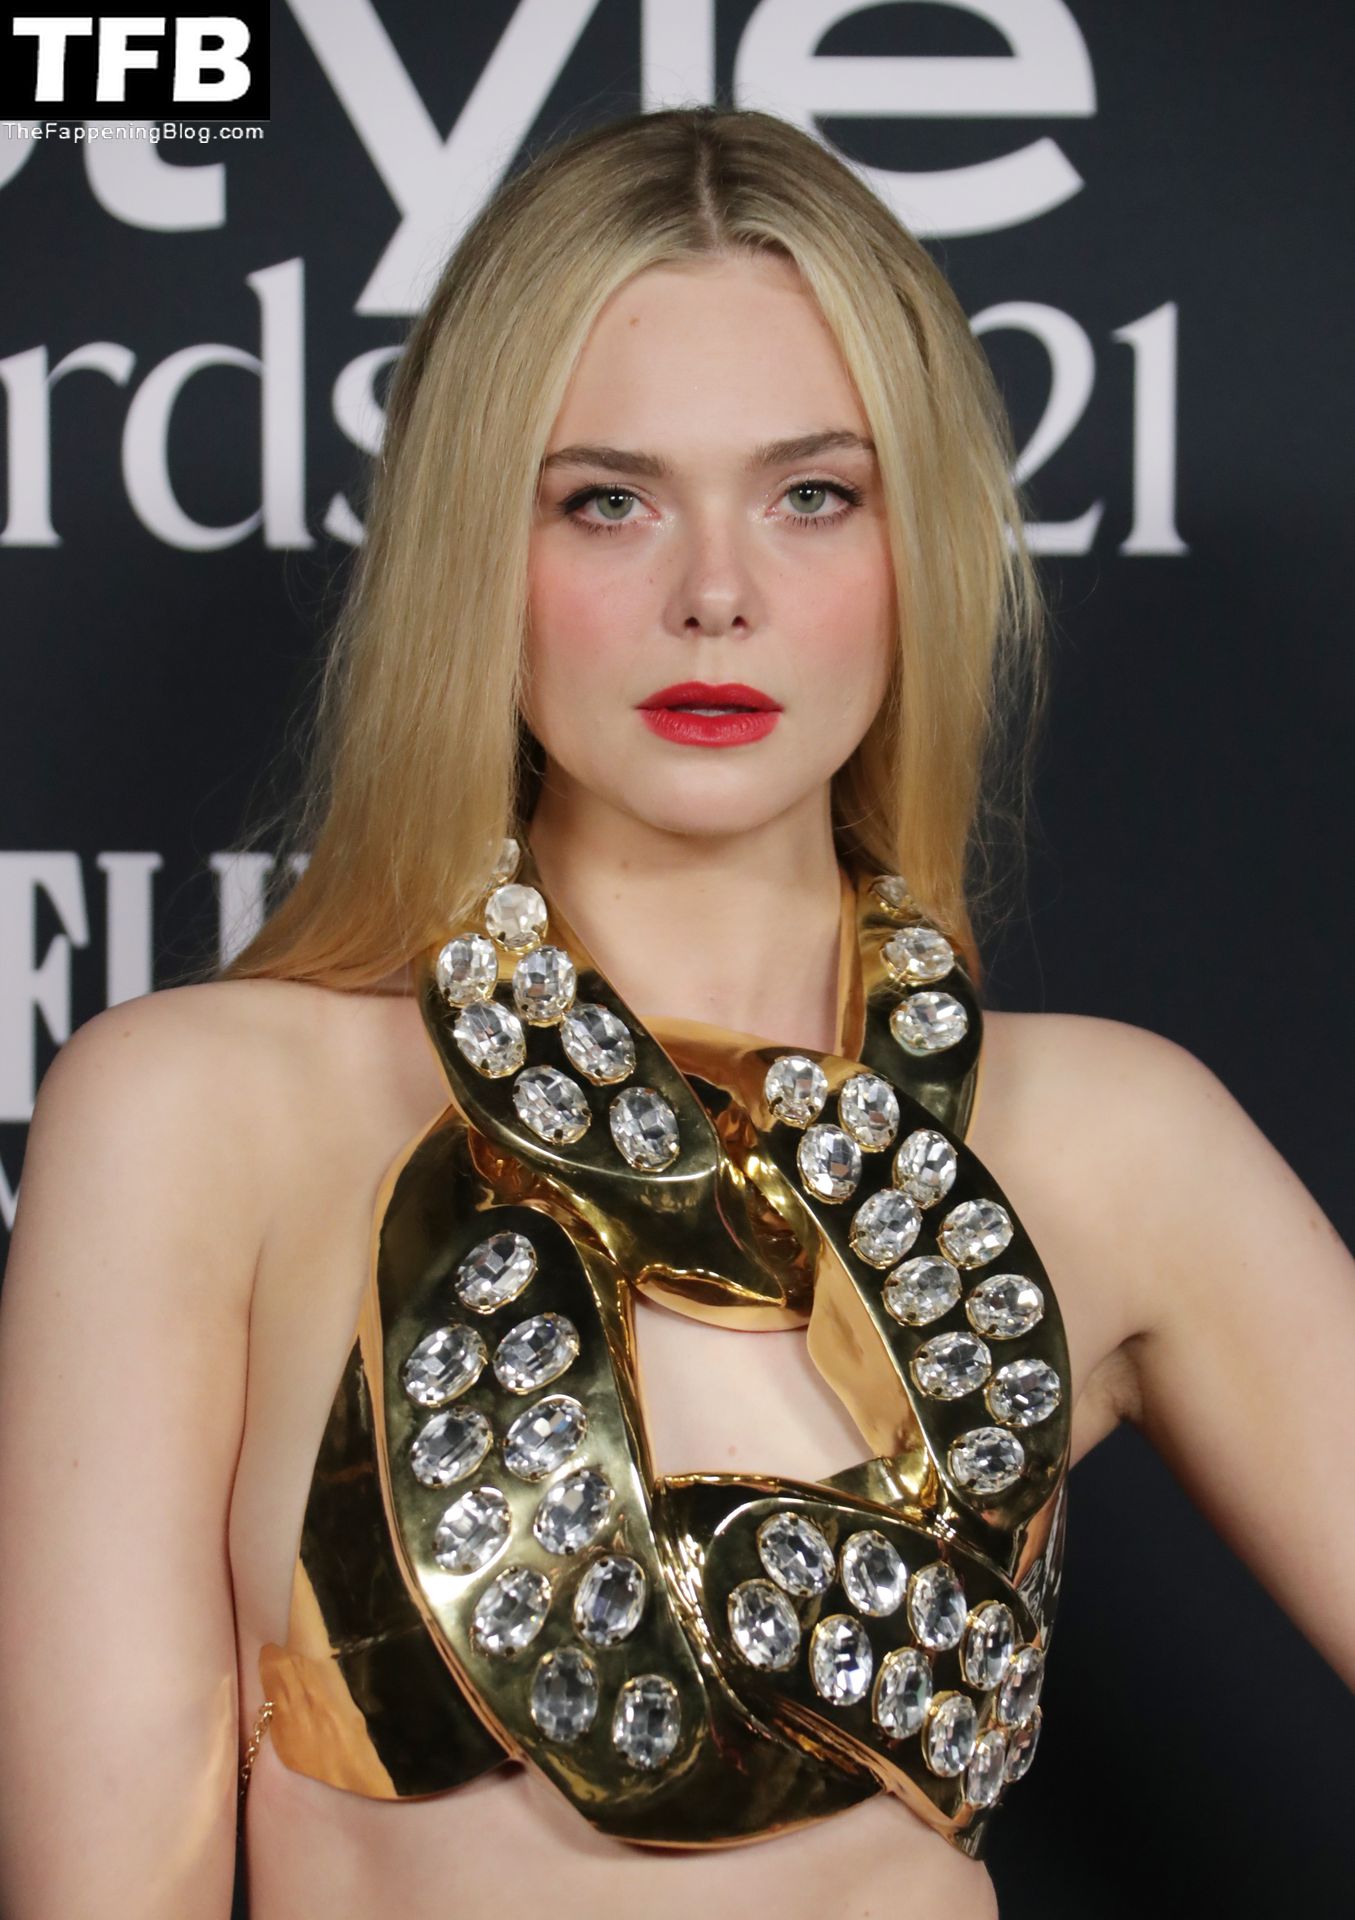 Elle-Fanning-Sexy-Braless-The-Fappening-Blog-104.jpg